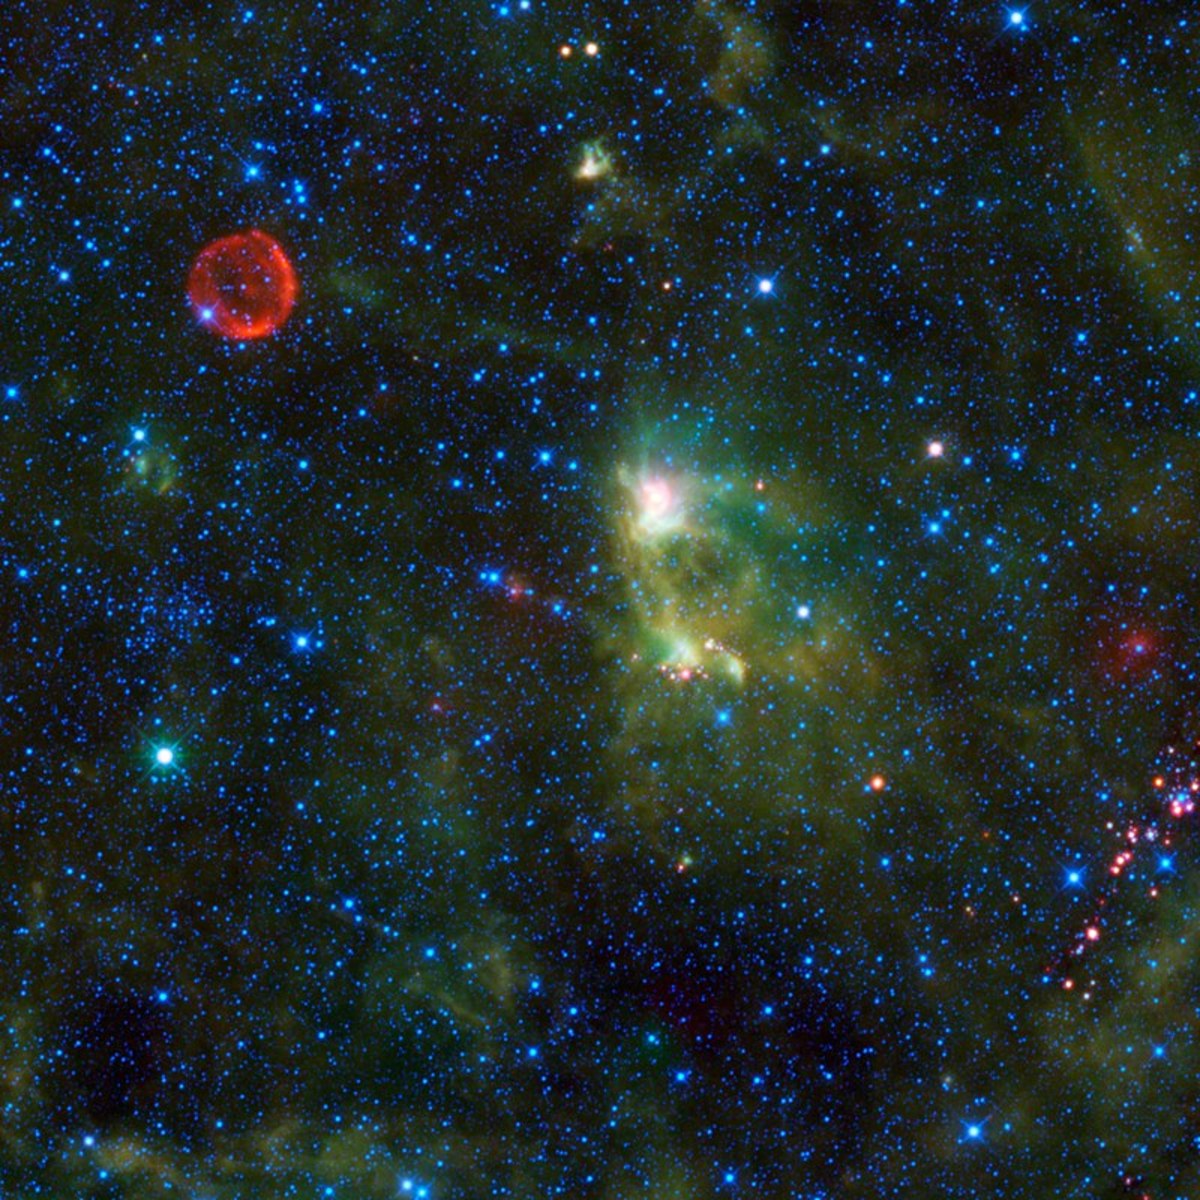 The red circle visible in the upper left part of this infrared image is the remnant of Tycho’s supernova of 1572.